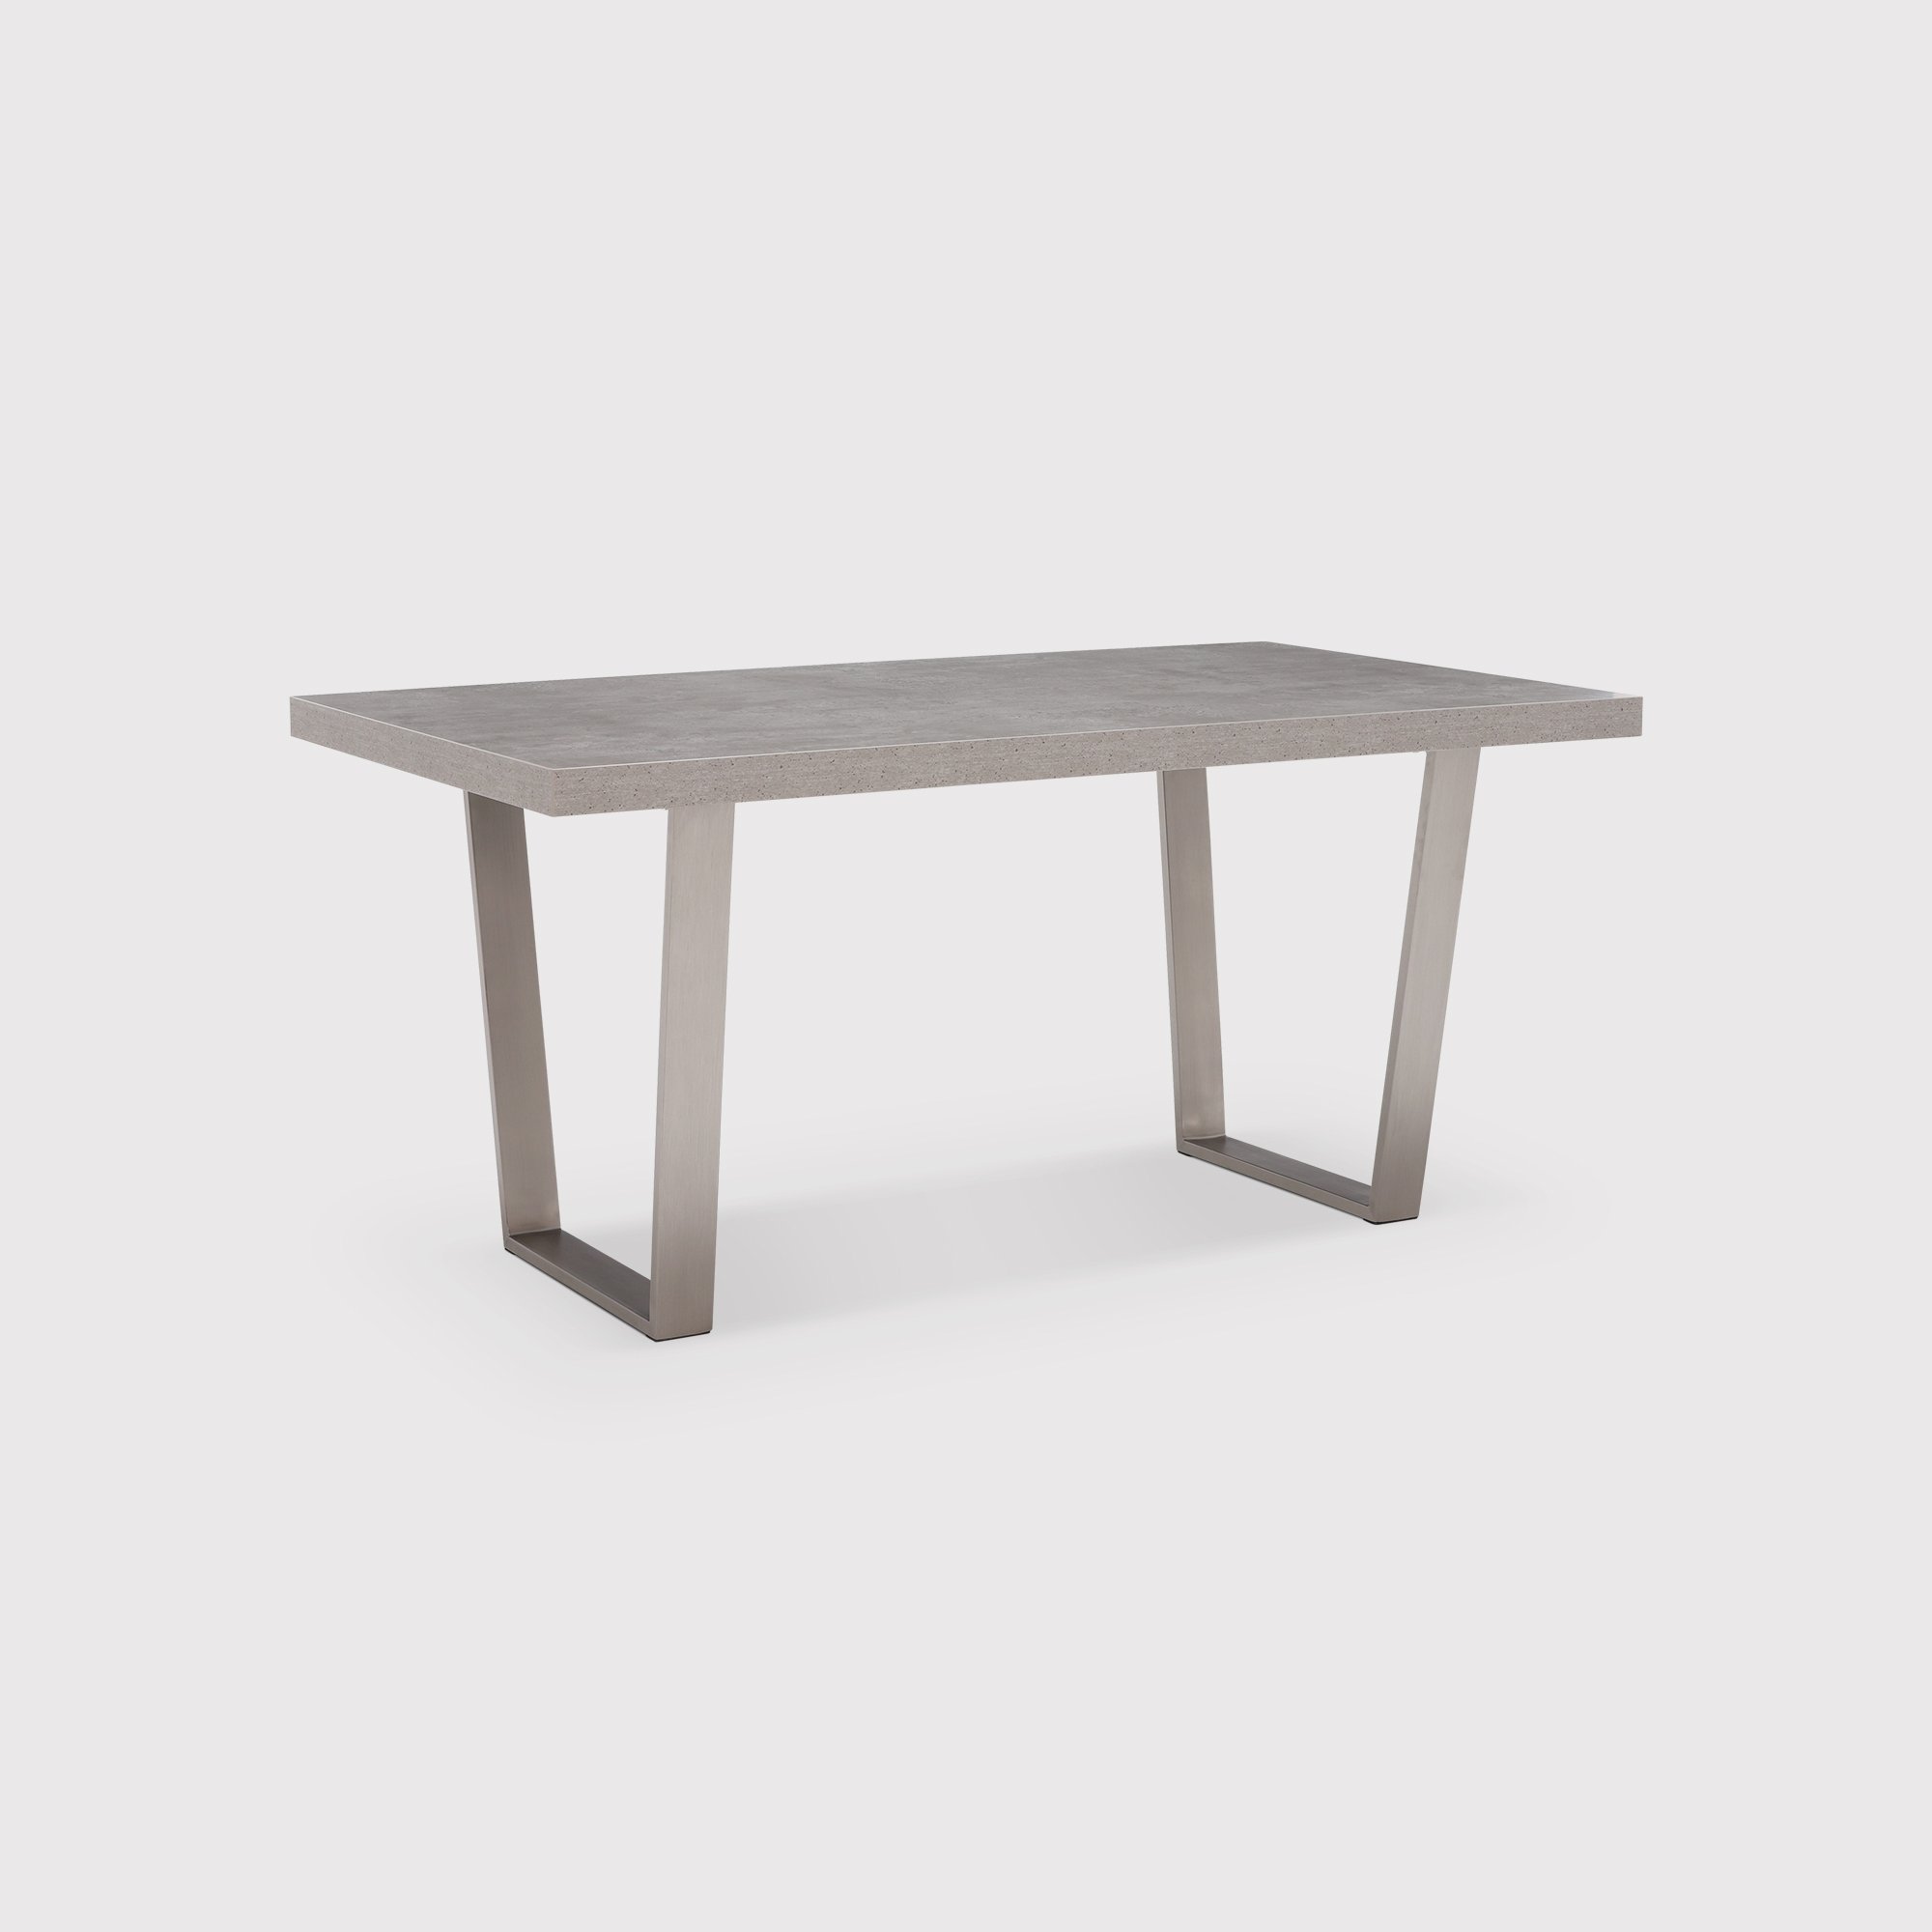 Photo of 160cm Halmstad fixed top dining table 160cm in grey w160cm